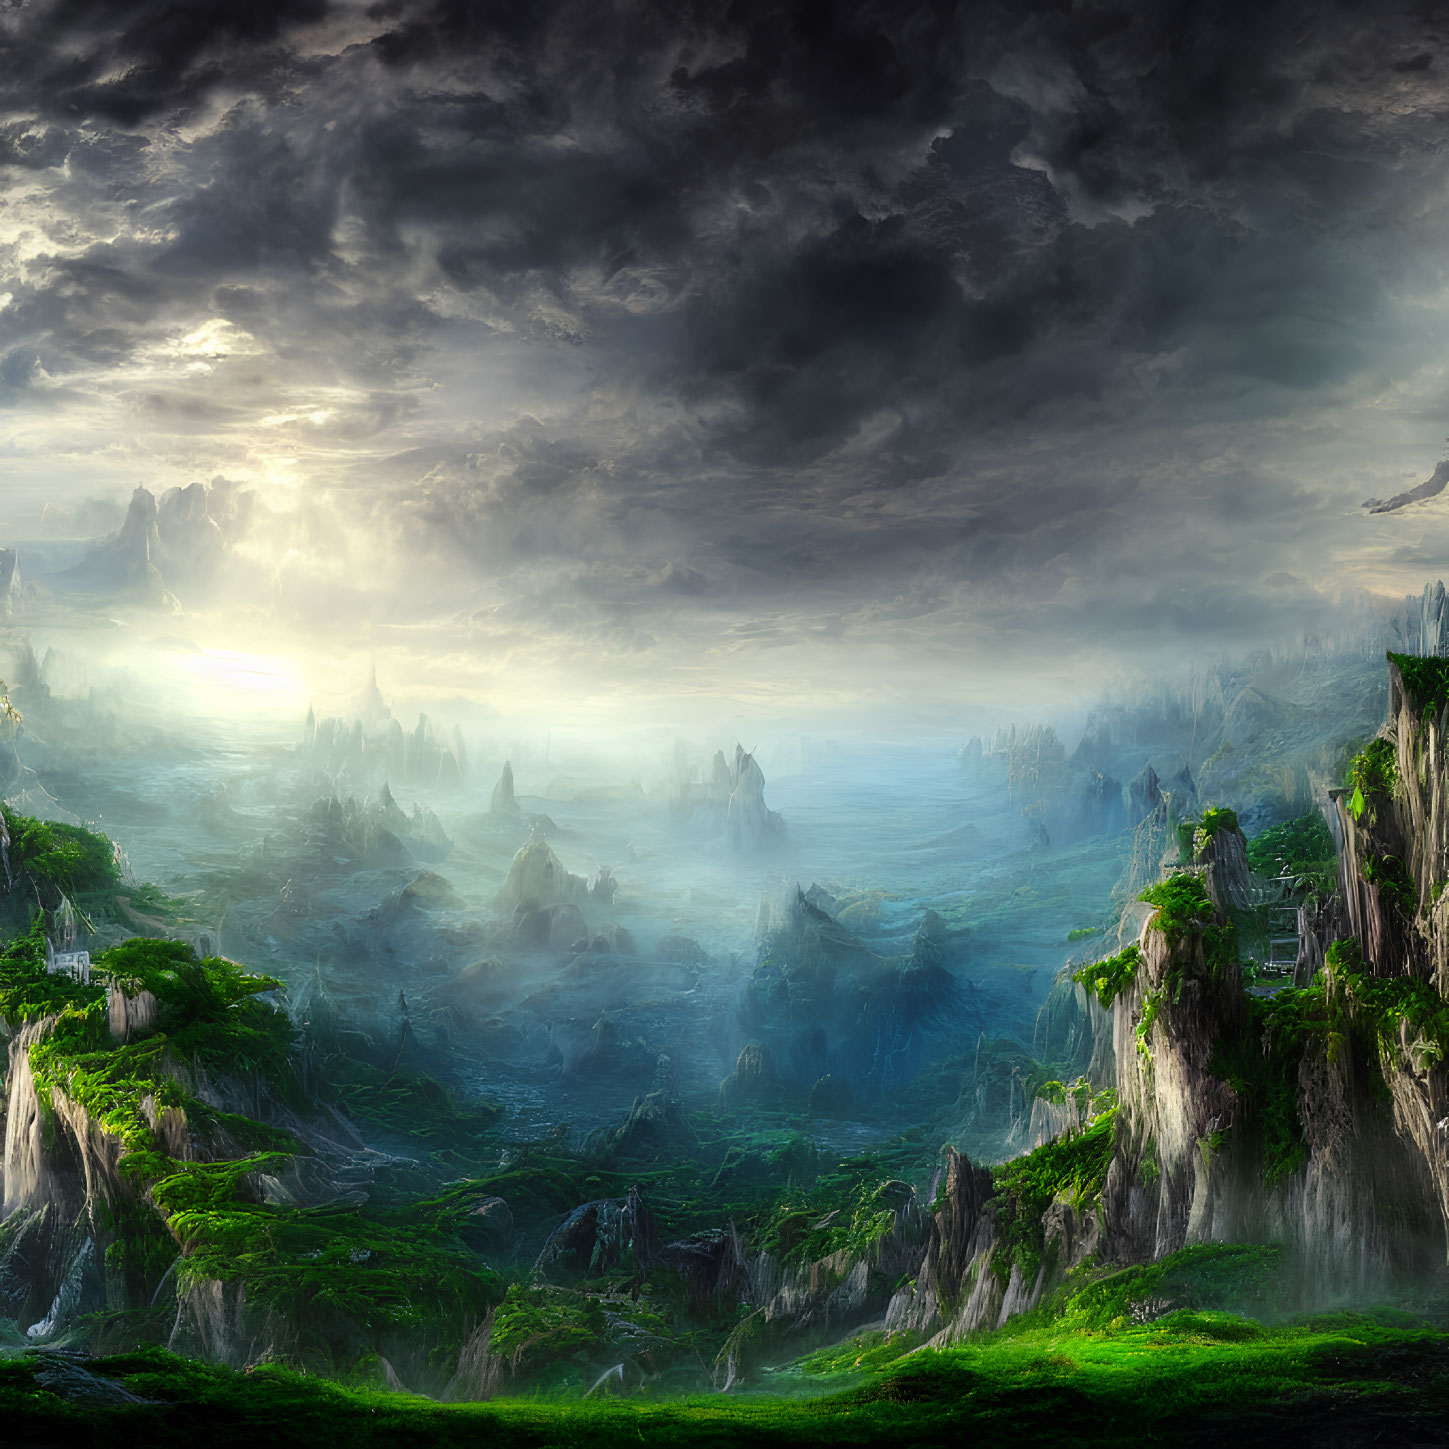 Mystical landscape featuring towering cliffs, waterfalls, ancient ruins, and dramatic sky